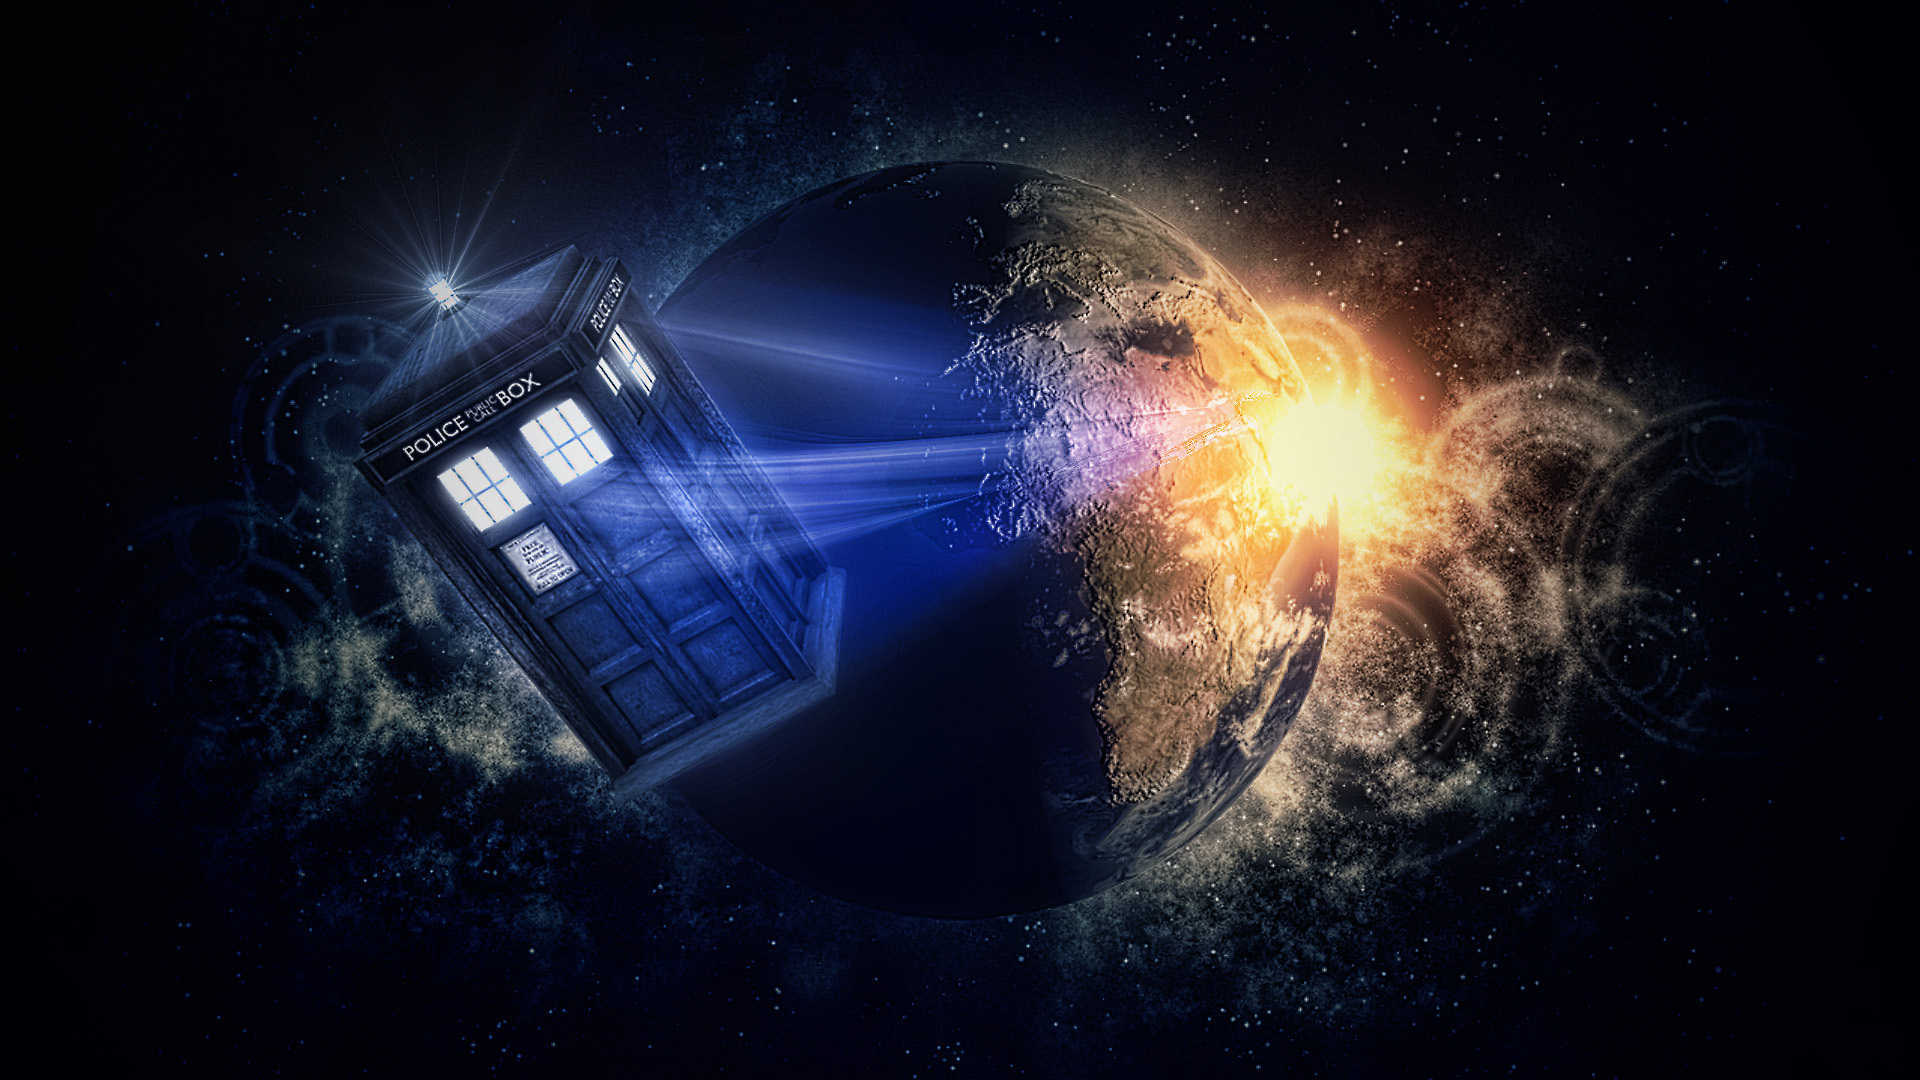 Wallpaper Doctor Who 05 HD Wallpaper Upload at September 26 2014 by 1920x1080